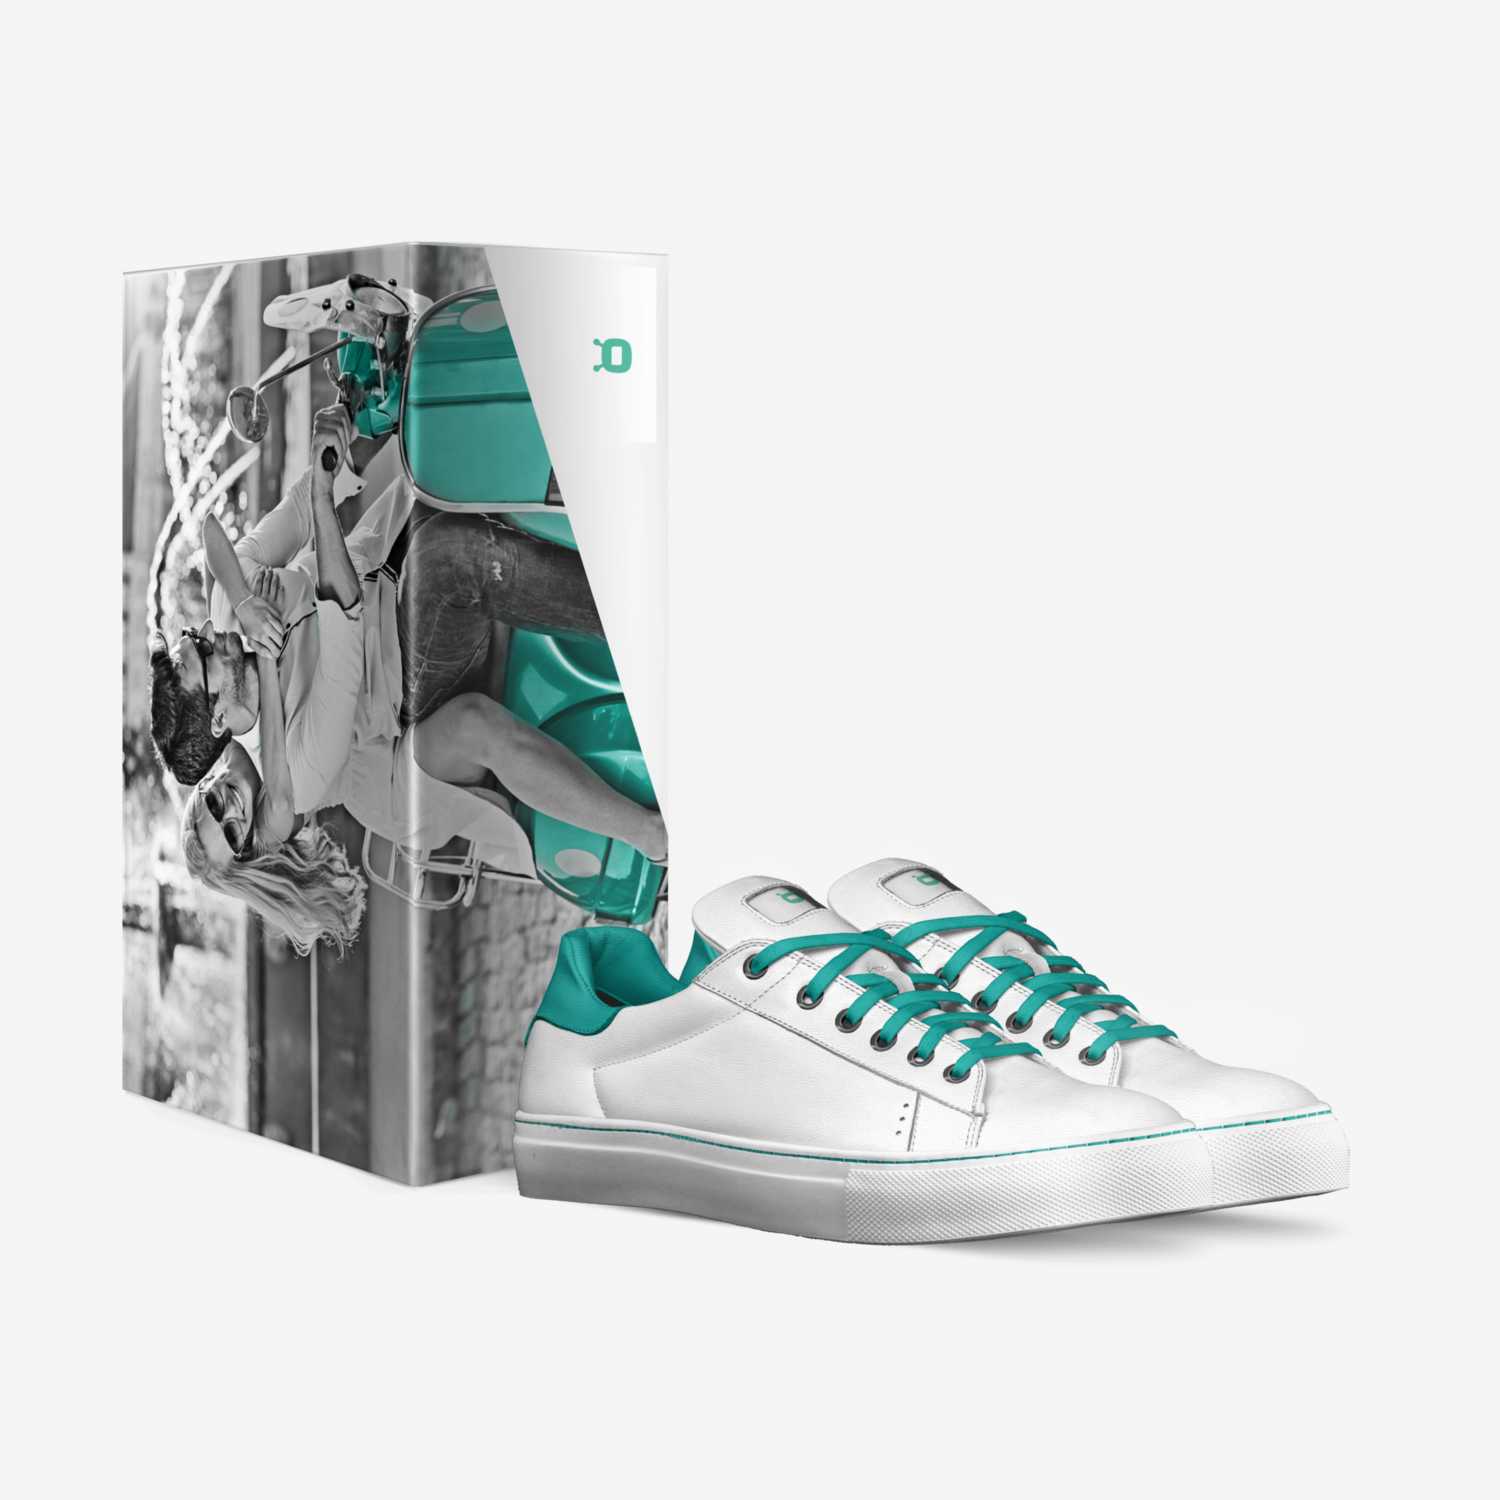 Roboshoes custom made in Italy shoes by Aliveshoes Team | Box view